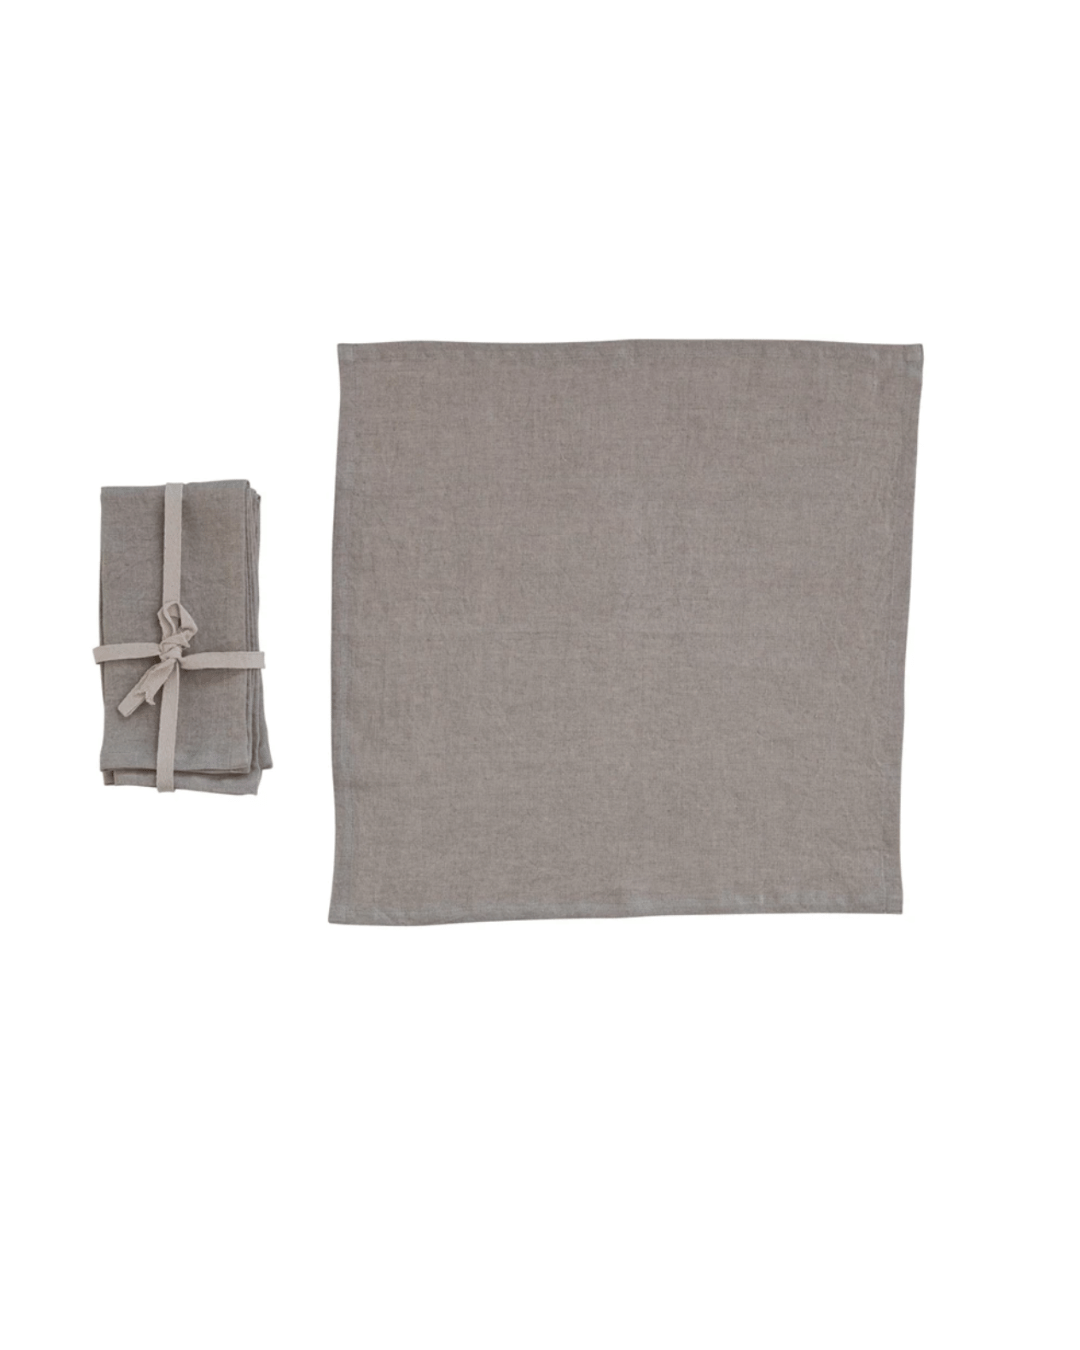 A folded Linen Napkins Grey S/4 and a Linen Napkins Grey S/4 tied together in Scottsdale, Arizona by Creative Co-op.